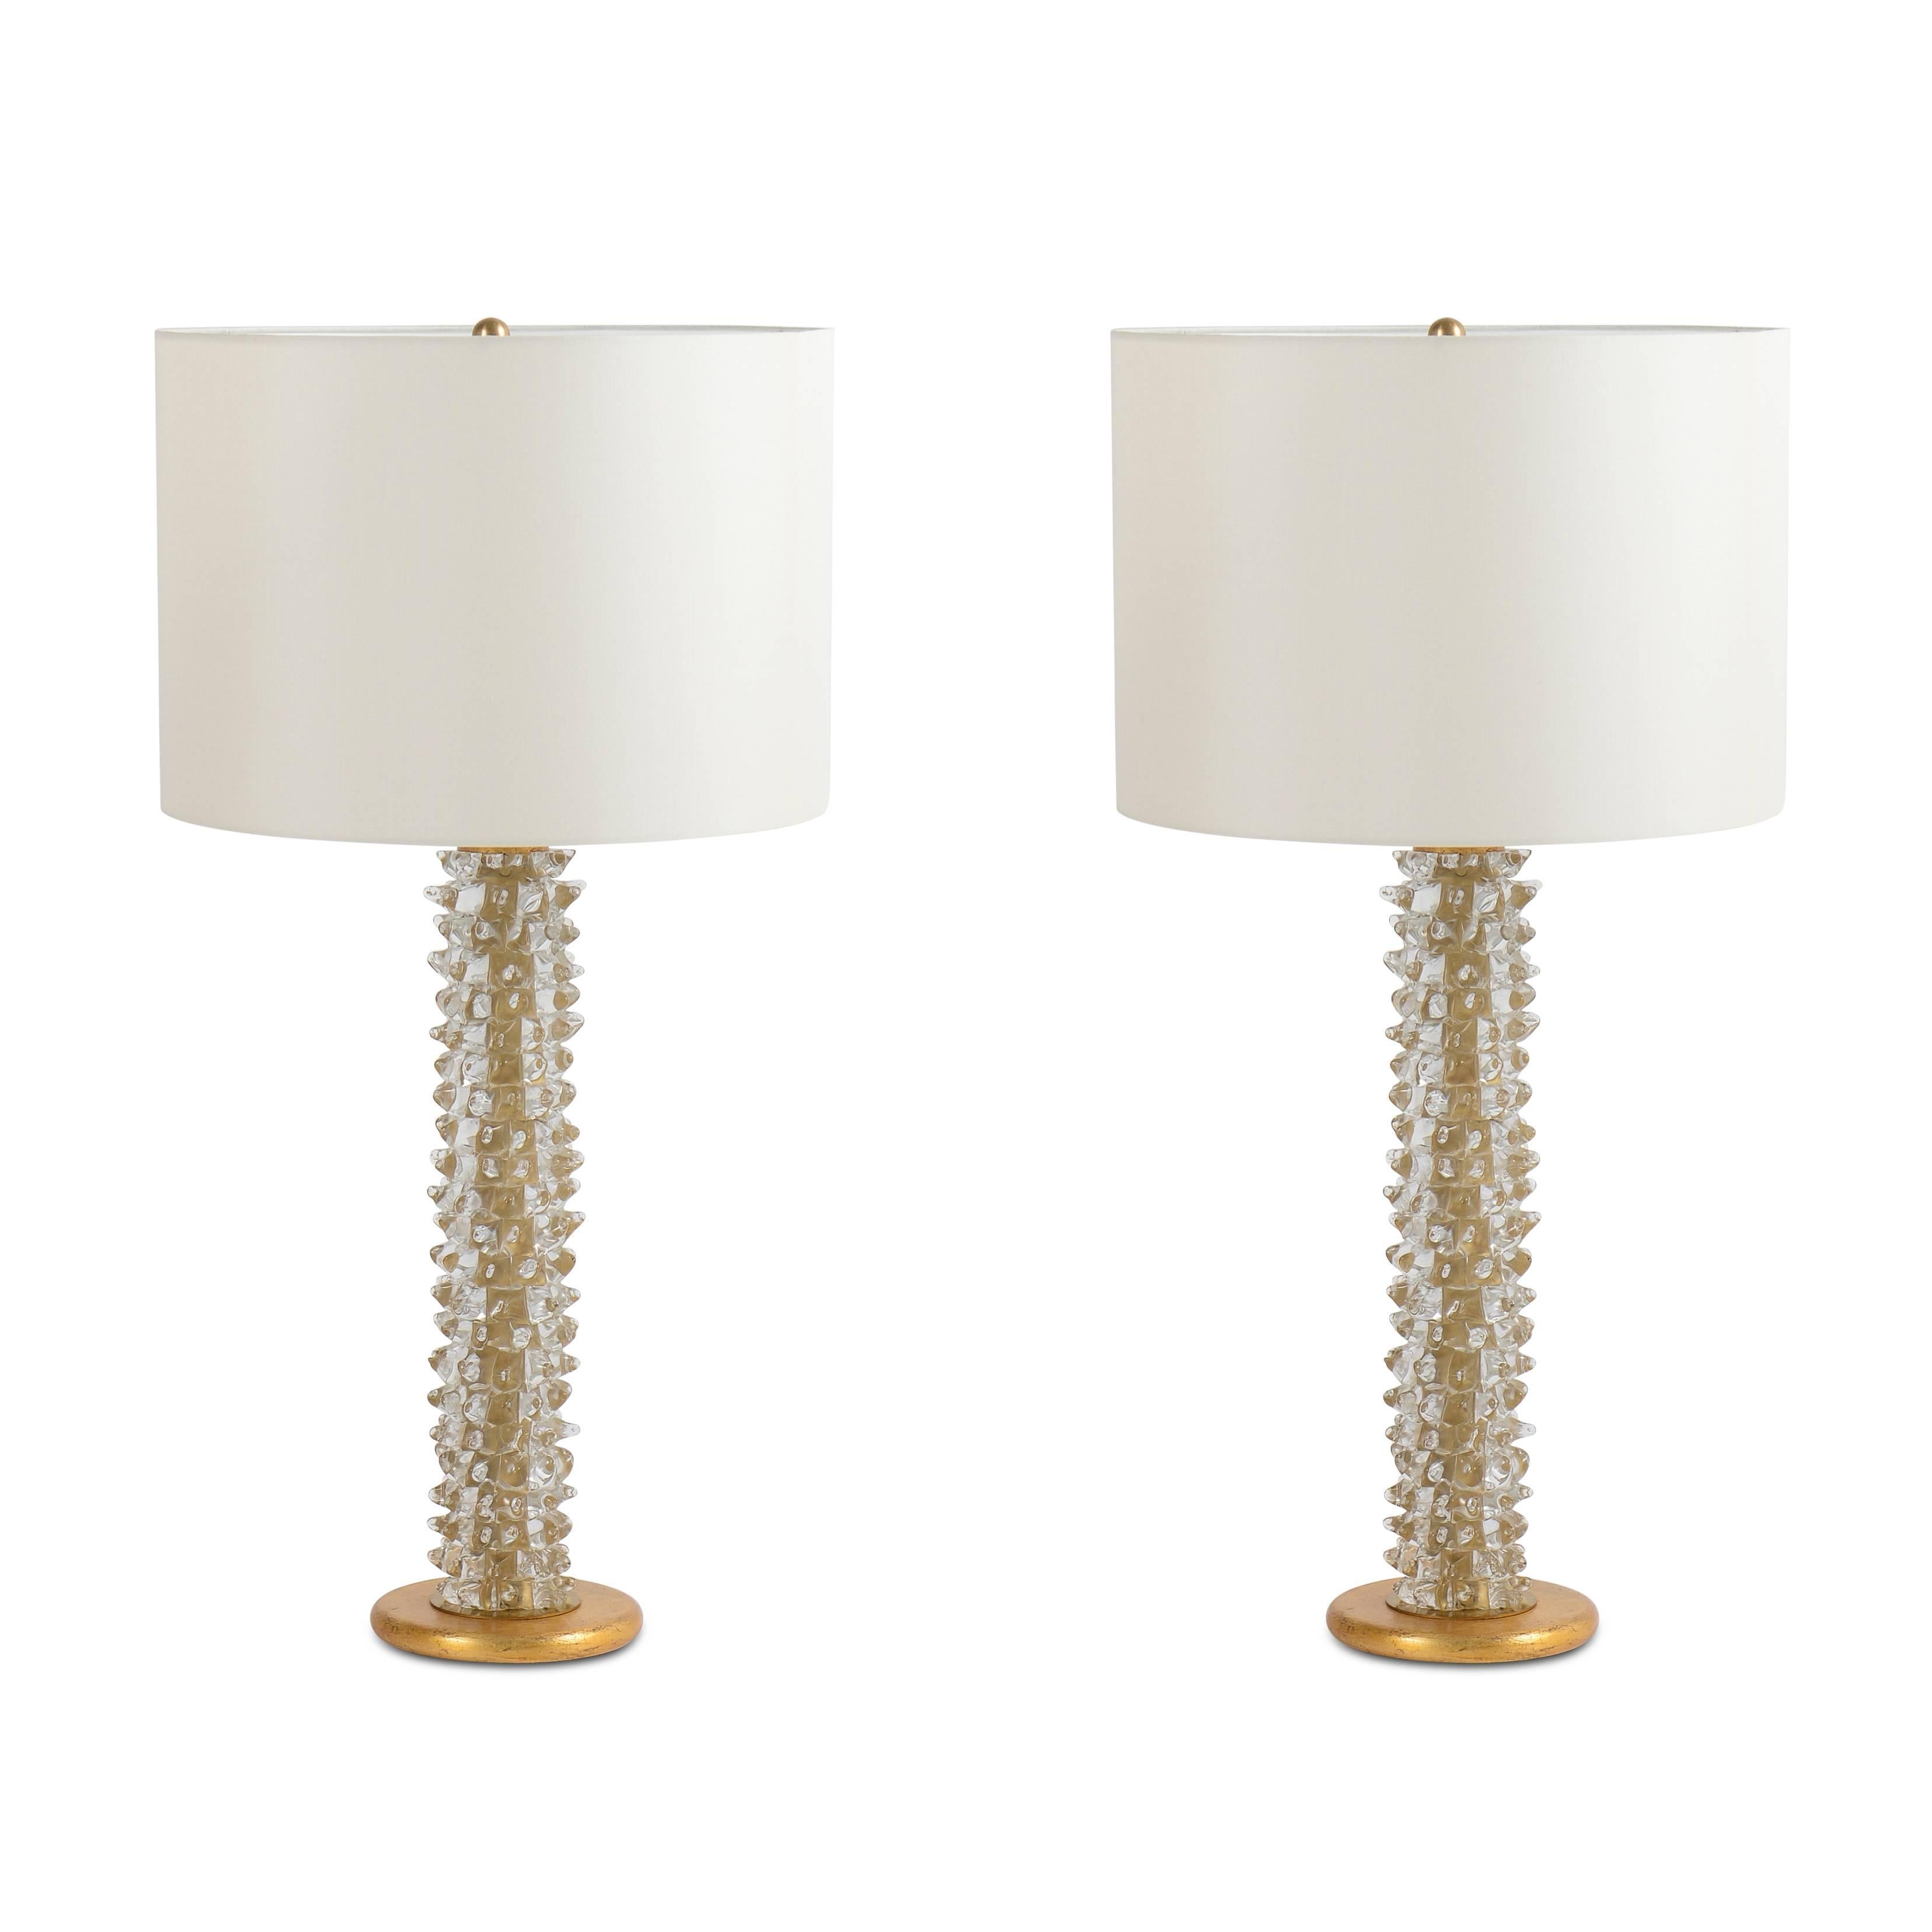 Pair of Brutale Table Lamps by Ercole Barovier